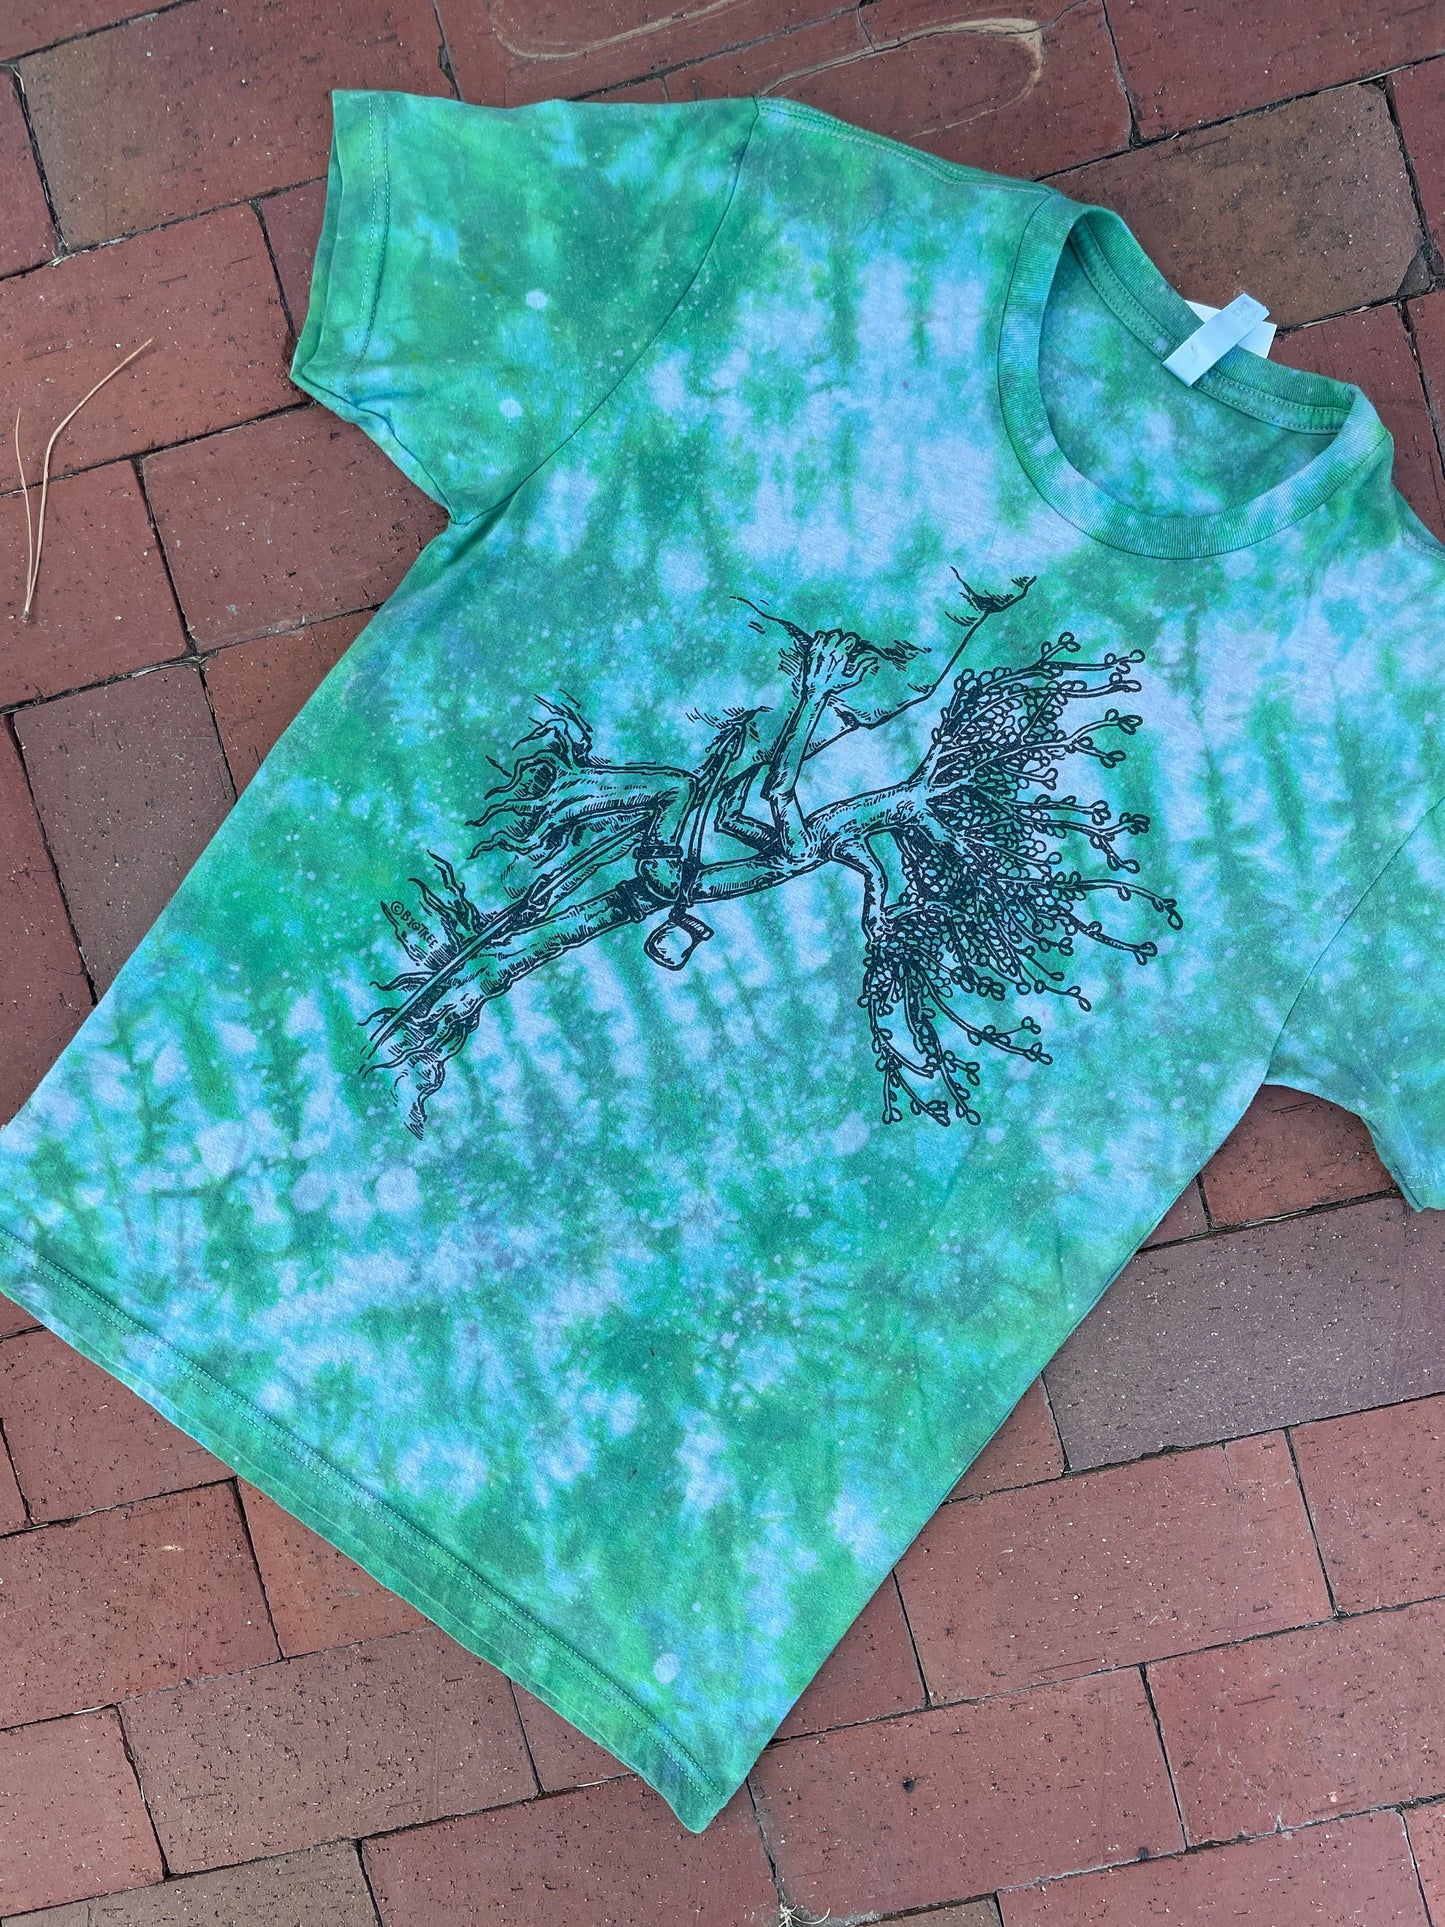 MEDIUM Men’s Tree Rock Climber Handmade Tie Dye Short Sleeve T-Shirt | One-Of-a-Kind Upcycled Green and Blue Graphic Tee